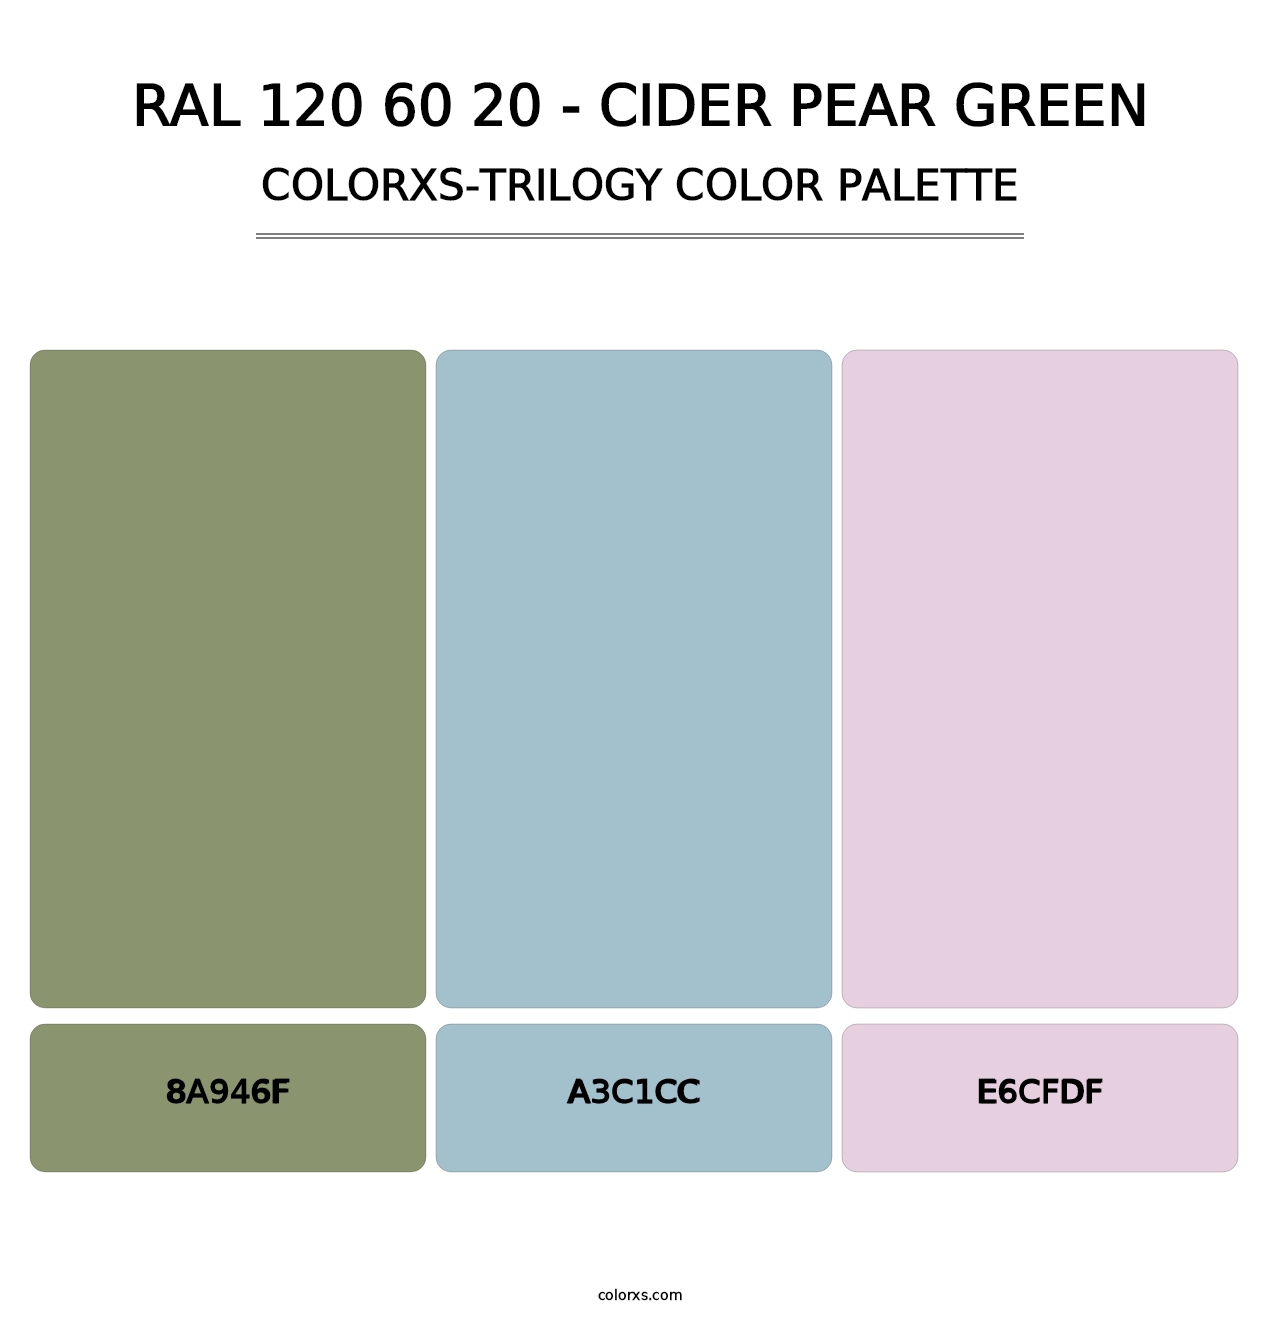 RAL 120 60 20 - Cider Pear Green - Colorxs Trilogy Palette